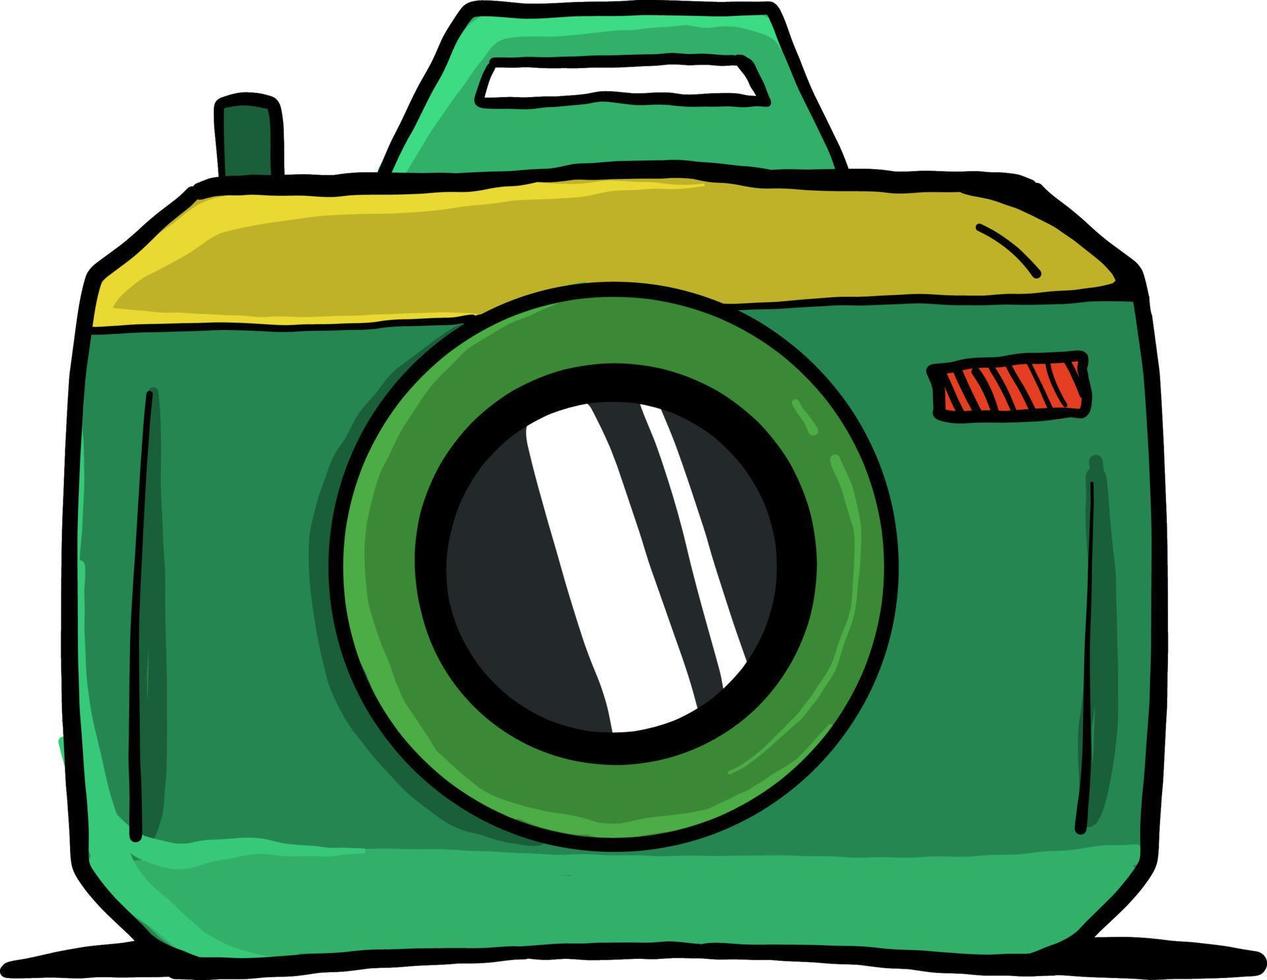 Old green camera ,illustration,vector on white background vector